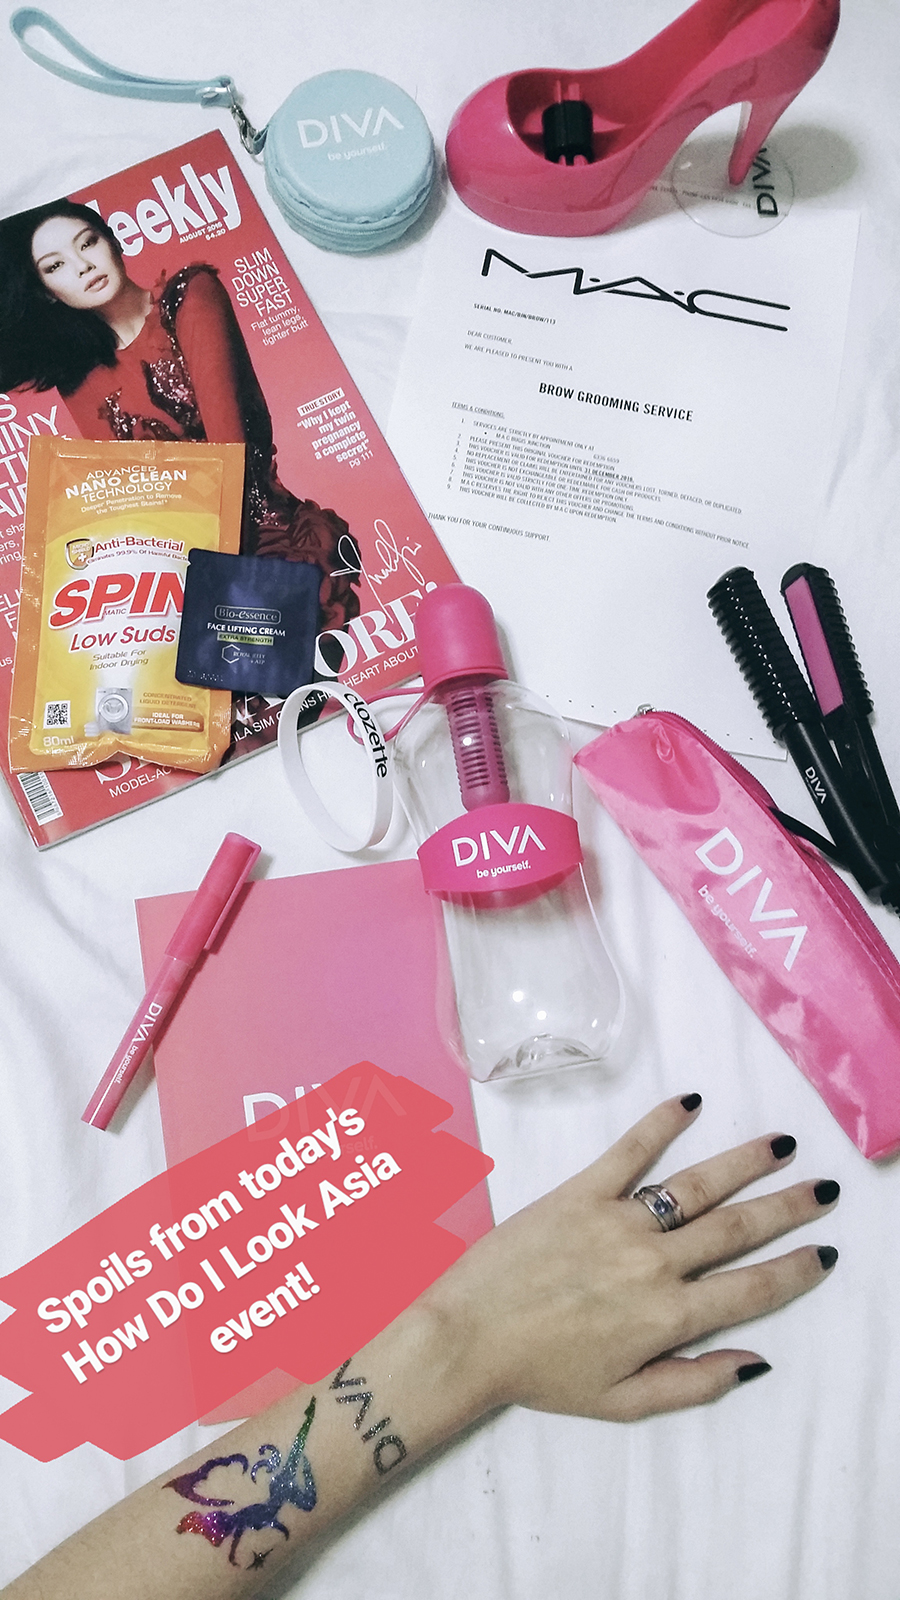 DIVA goodies from the How Do I Look Asia Season 2 premiere party, Singapore.